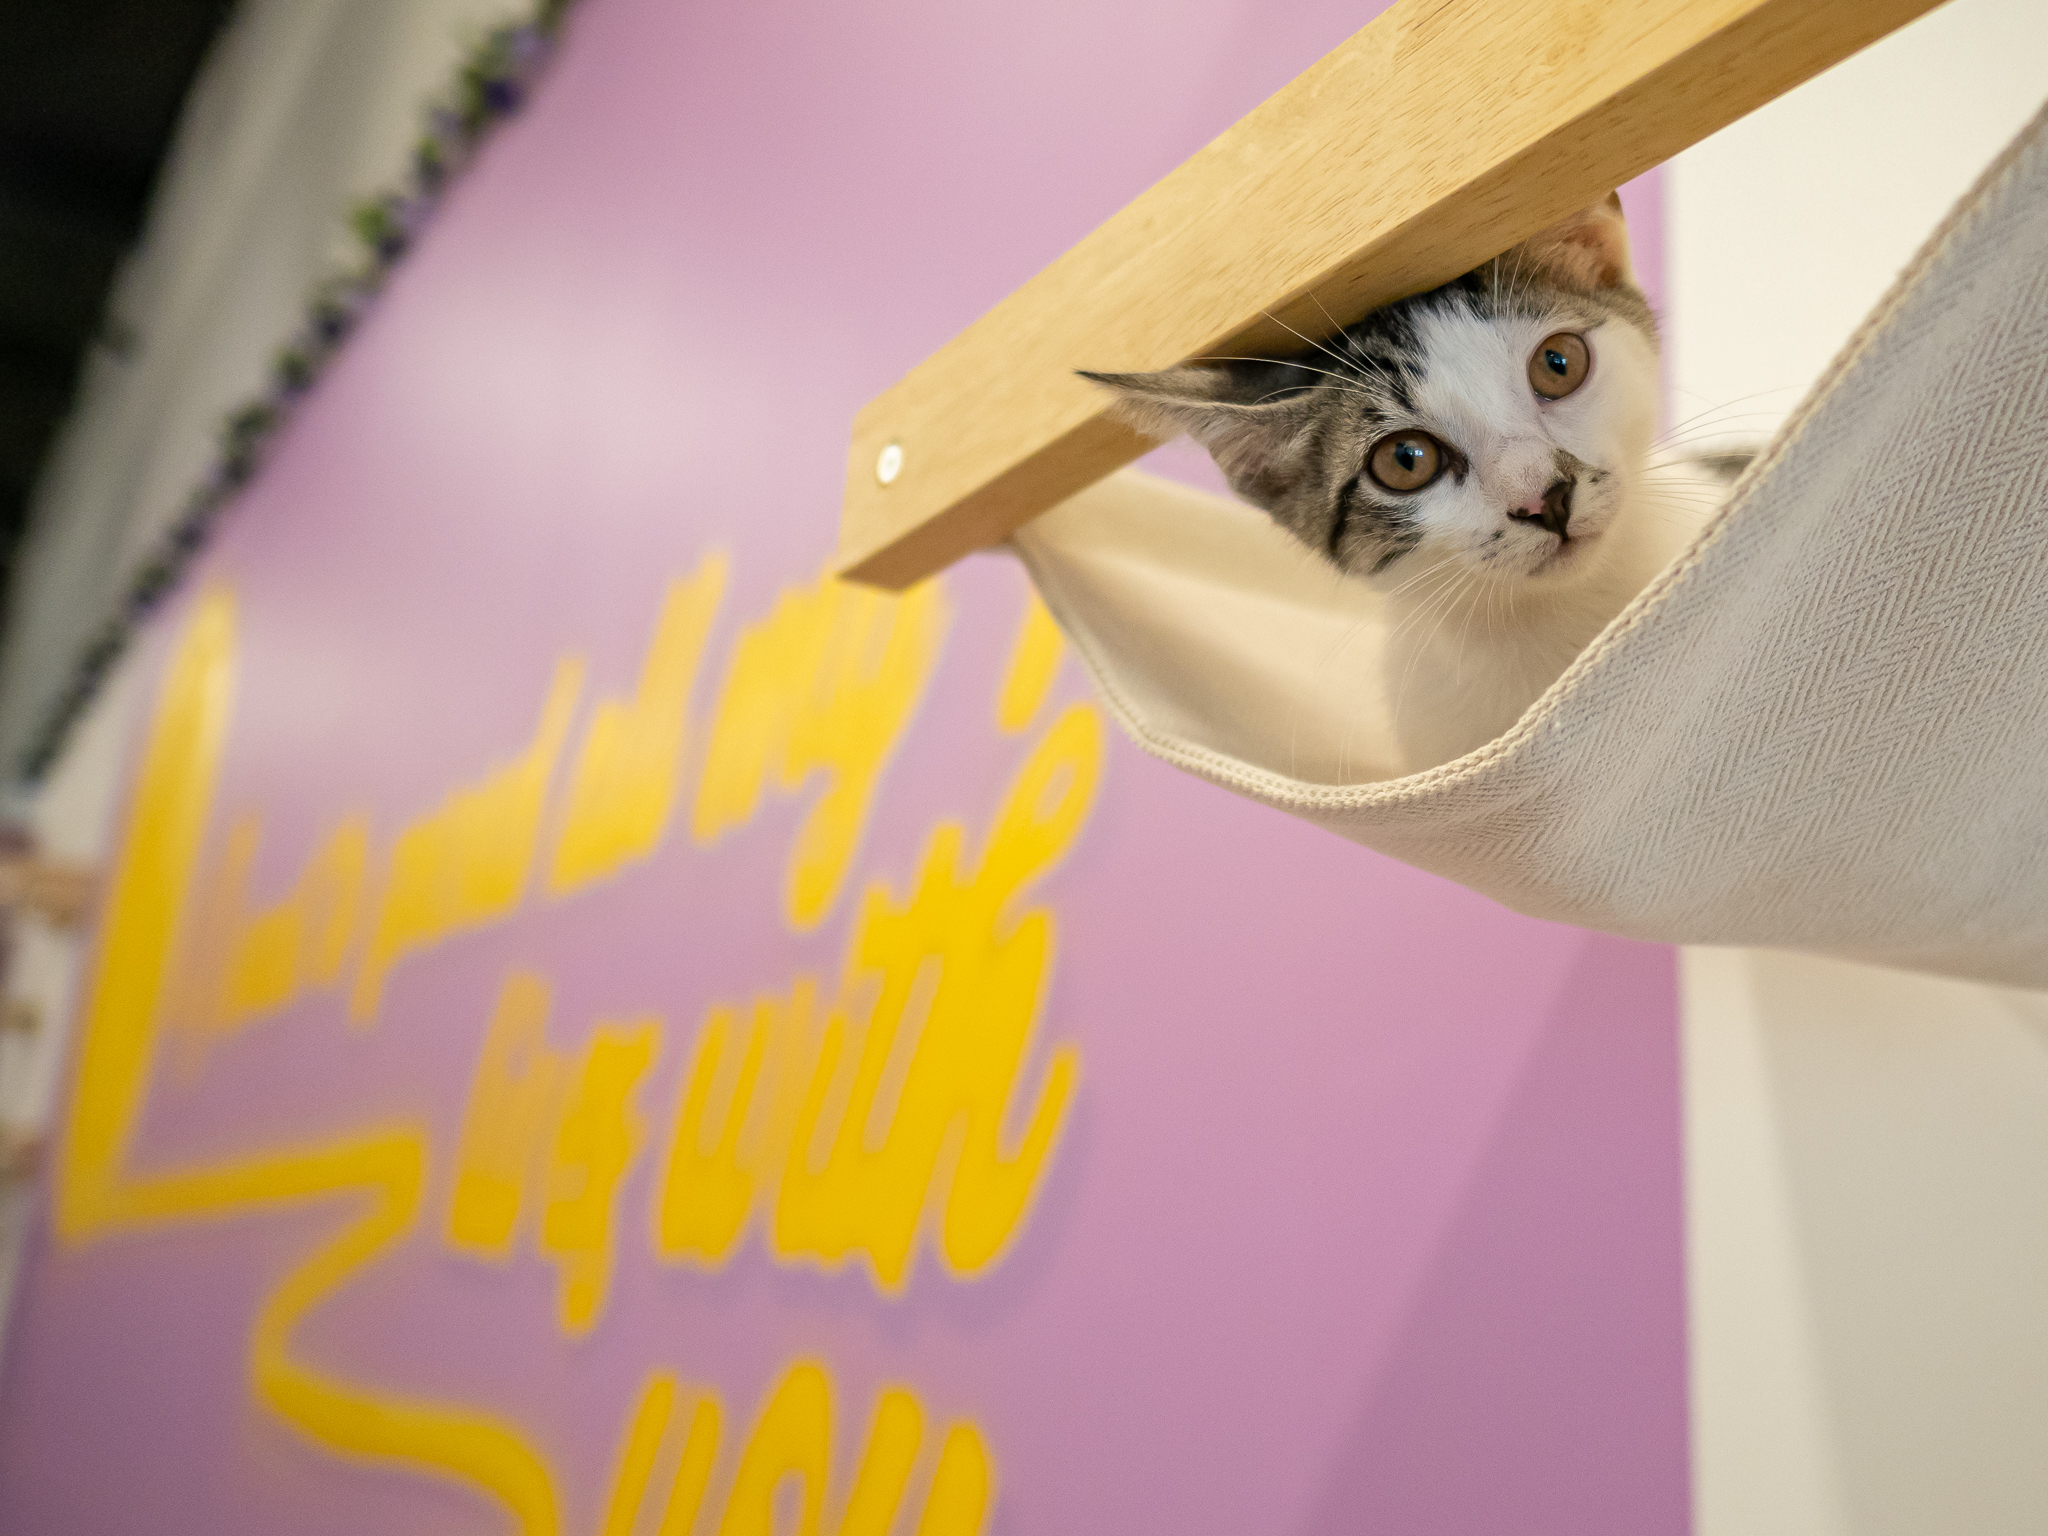 A little gray and white cat peeking out of a hanging cat shelf hammock on the wall.